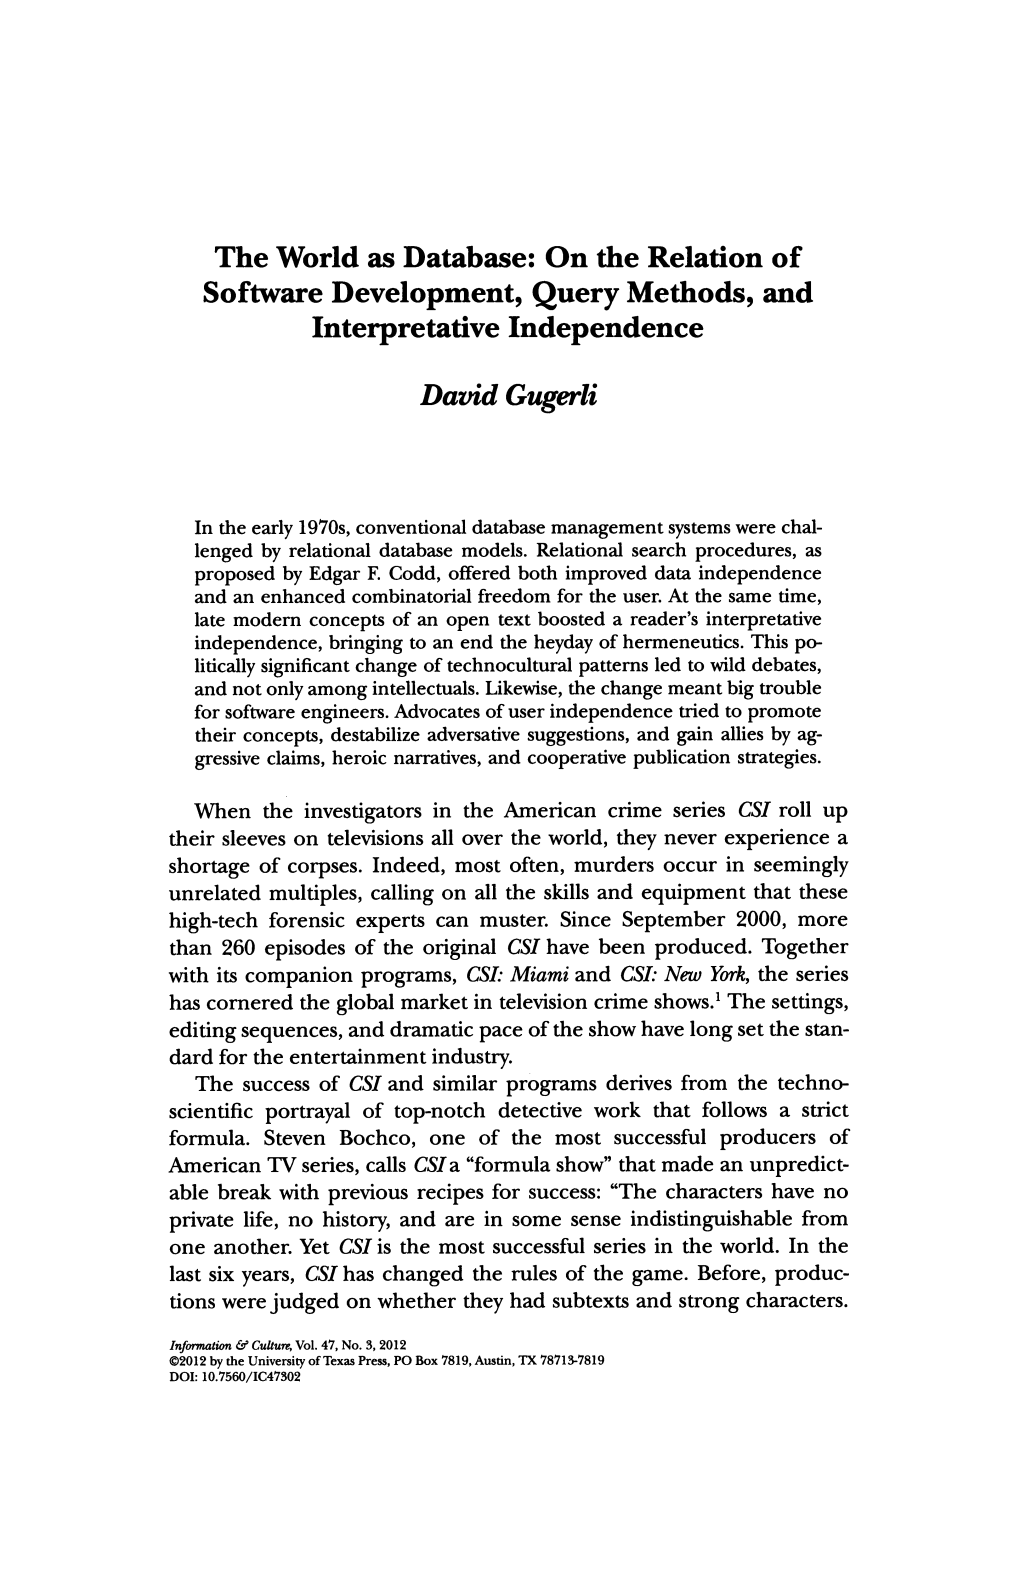 The World As Database: on the Relation of Software Development, Query Methods, and Interpretative Independence